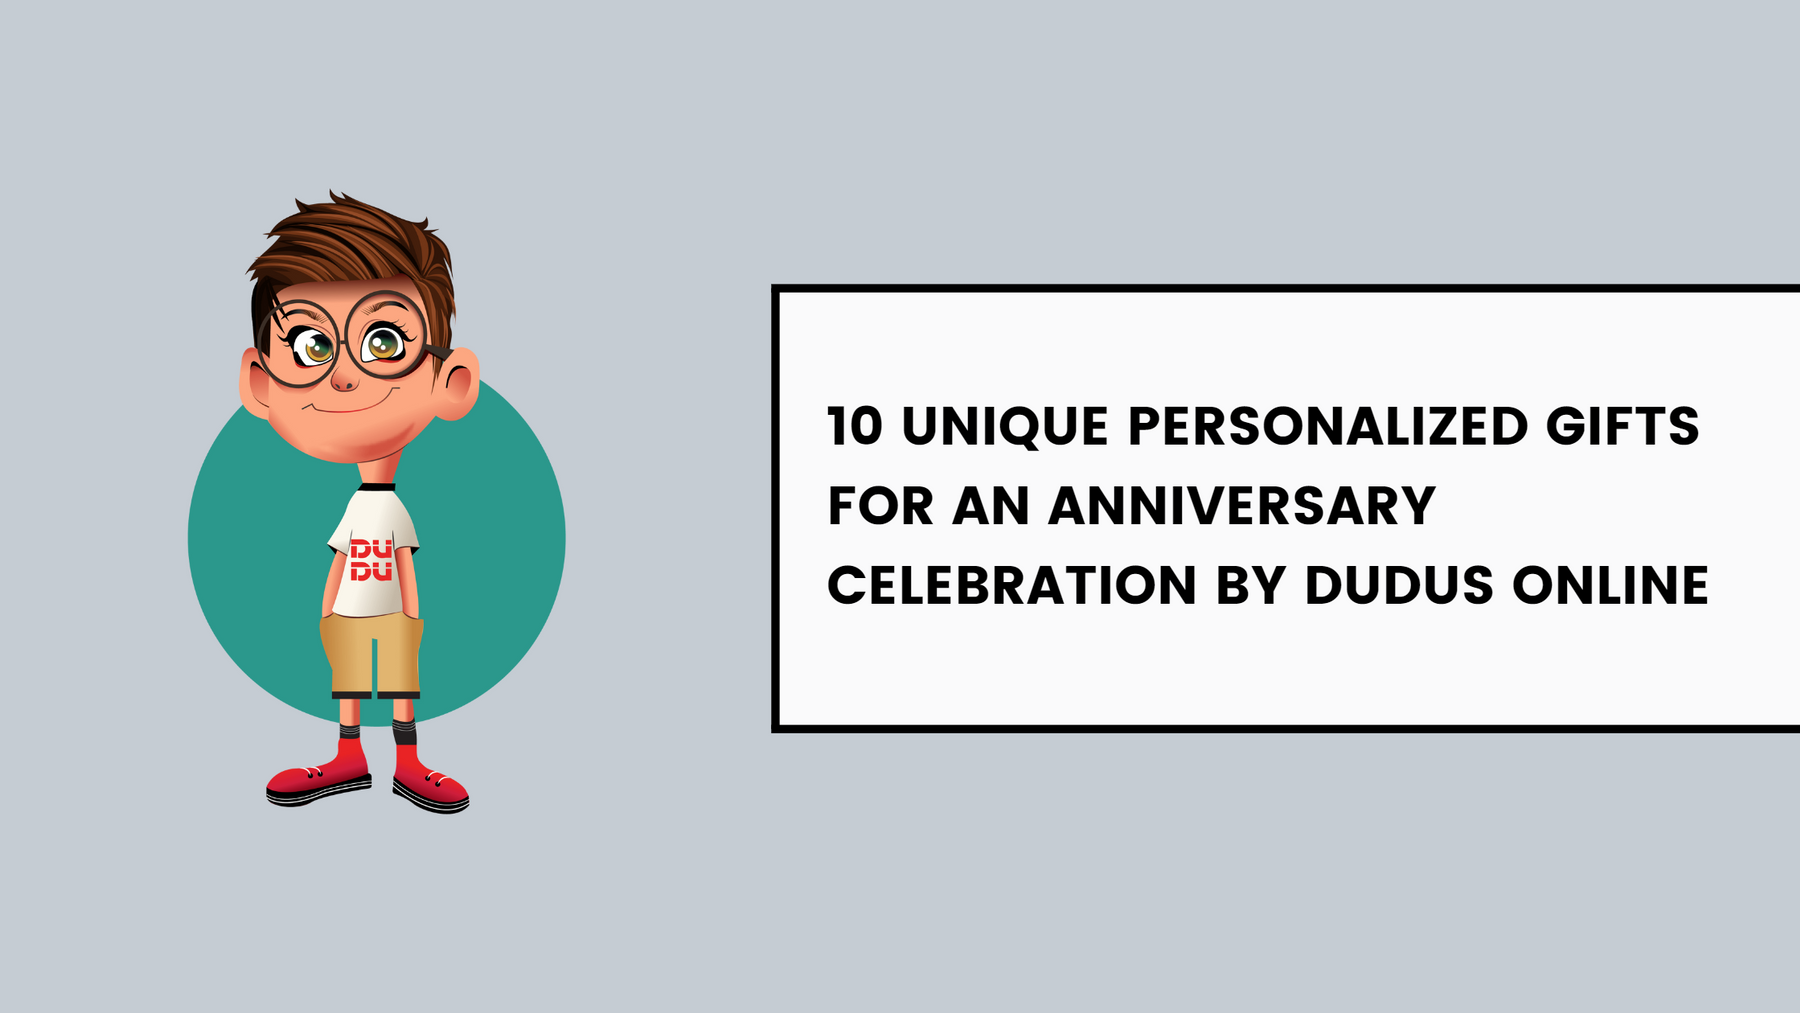 10 Unique Personalized Gifts For An Anniversary Celebration By Dudus Online